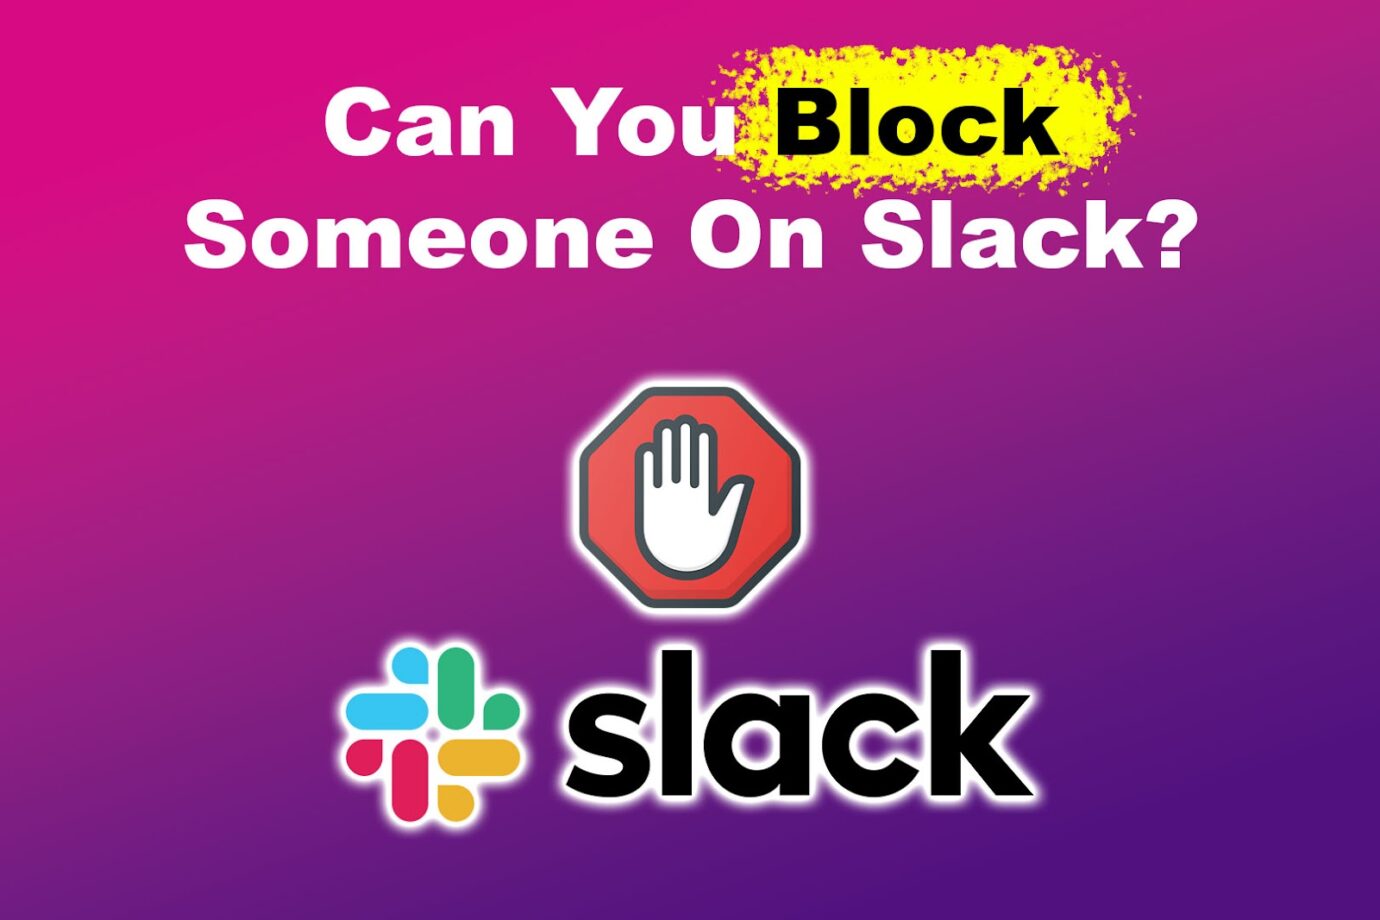 Can You Block Someone On Slack